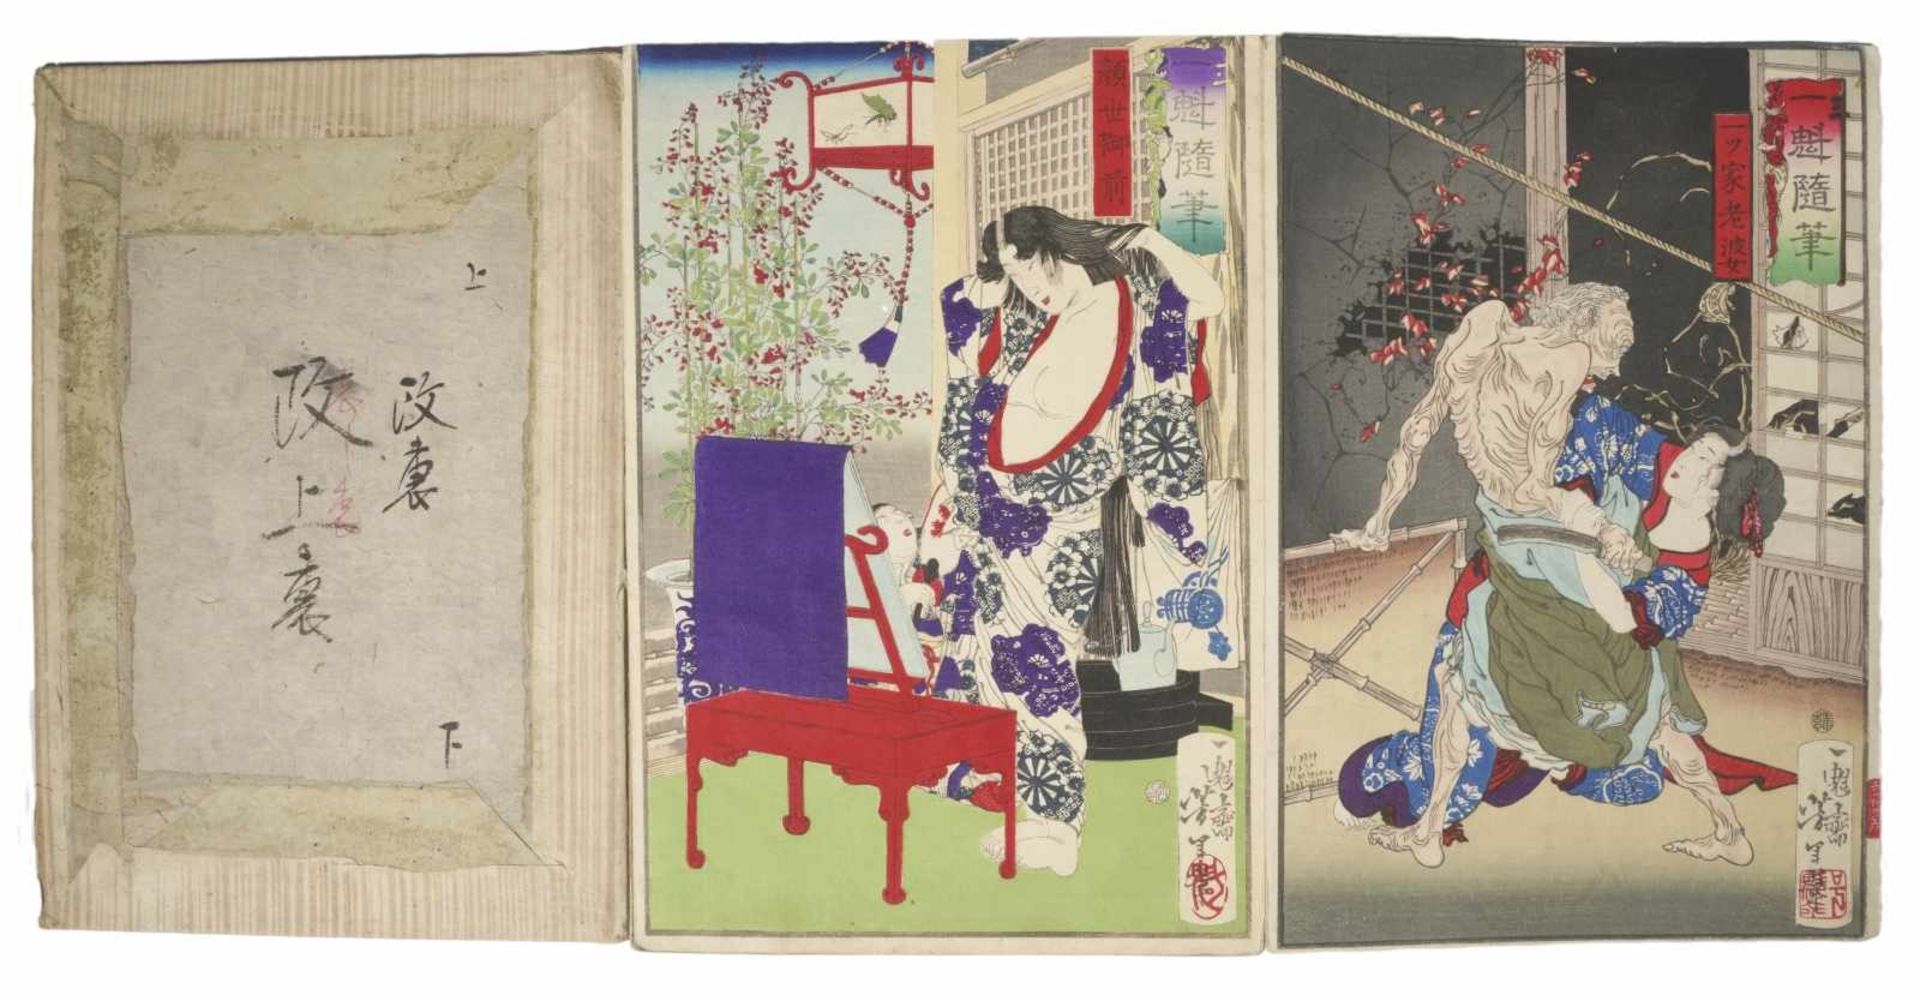 Leporello with many colored woodcuts, Japan, 19th c., 34,5 x 1 x 24 cm, Provenance: